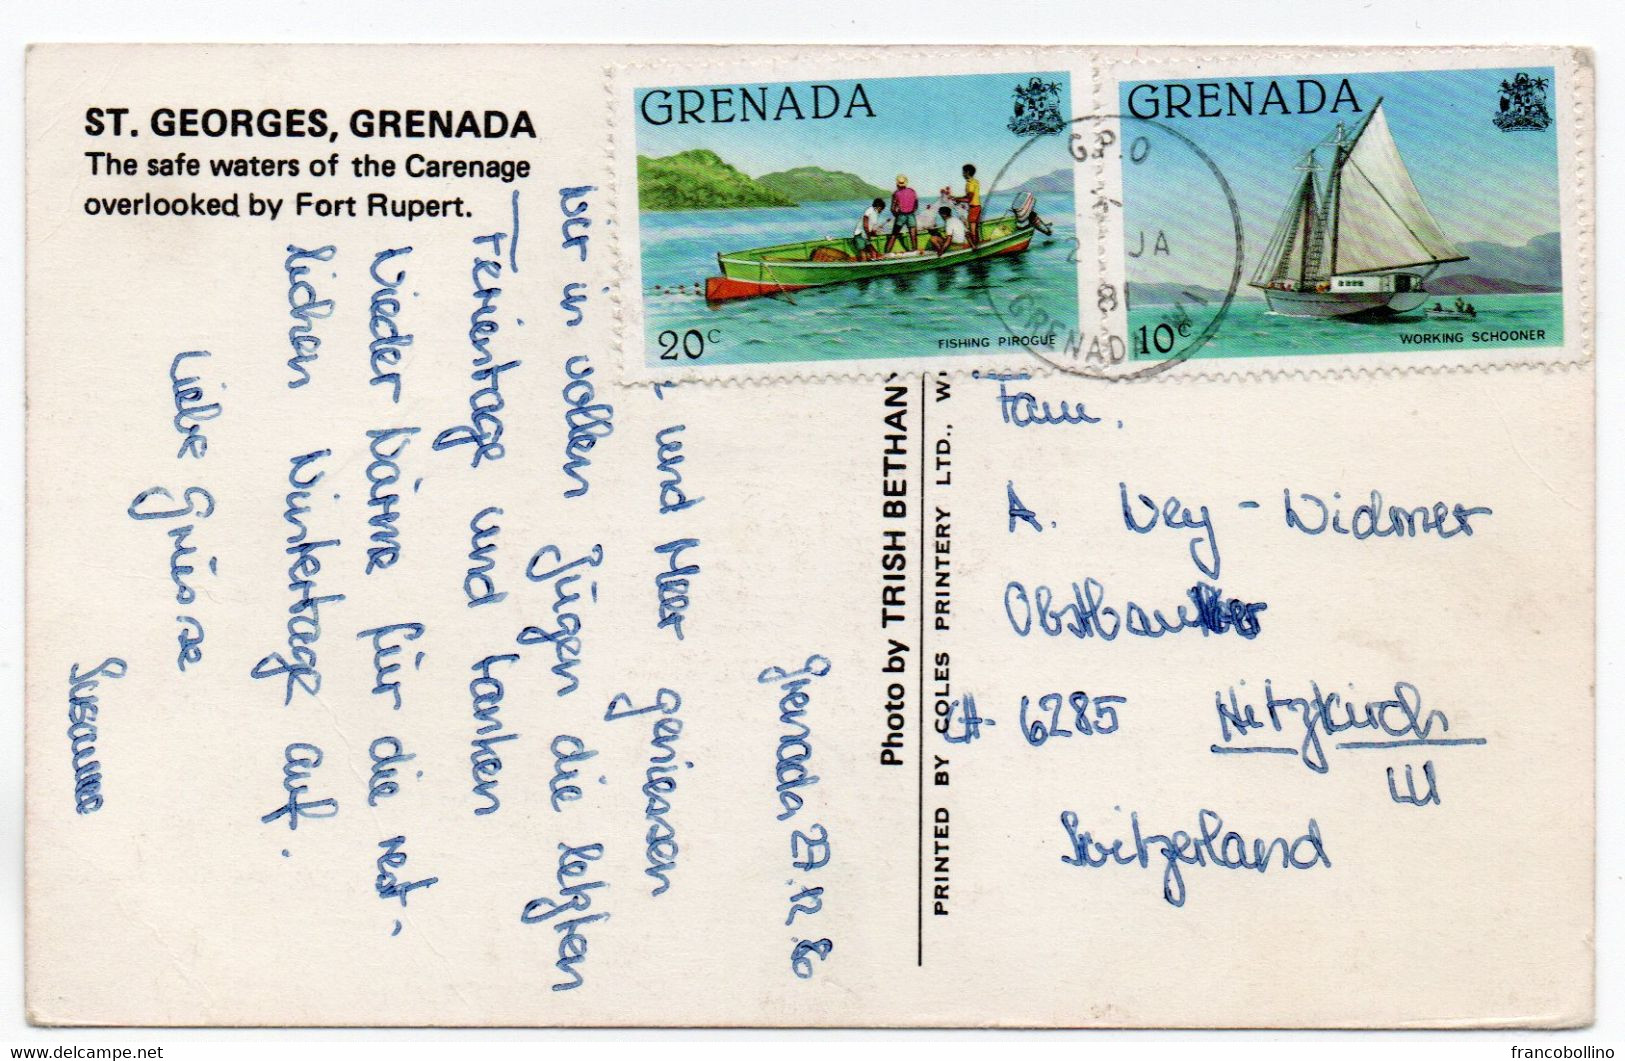 GRENADA - ST. GEORGES THE SAFE WATERS OF THE CARENAGE / THEMATIC STAMPS-SHIP - Grenada